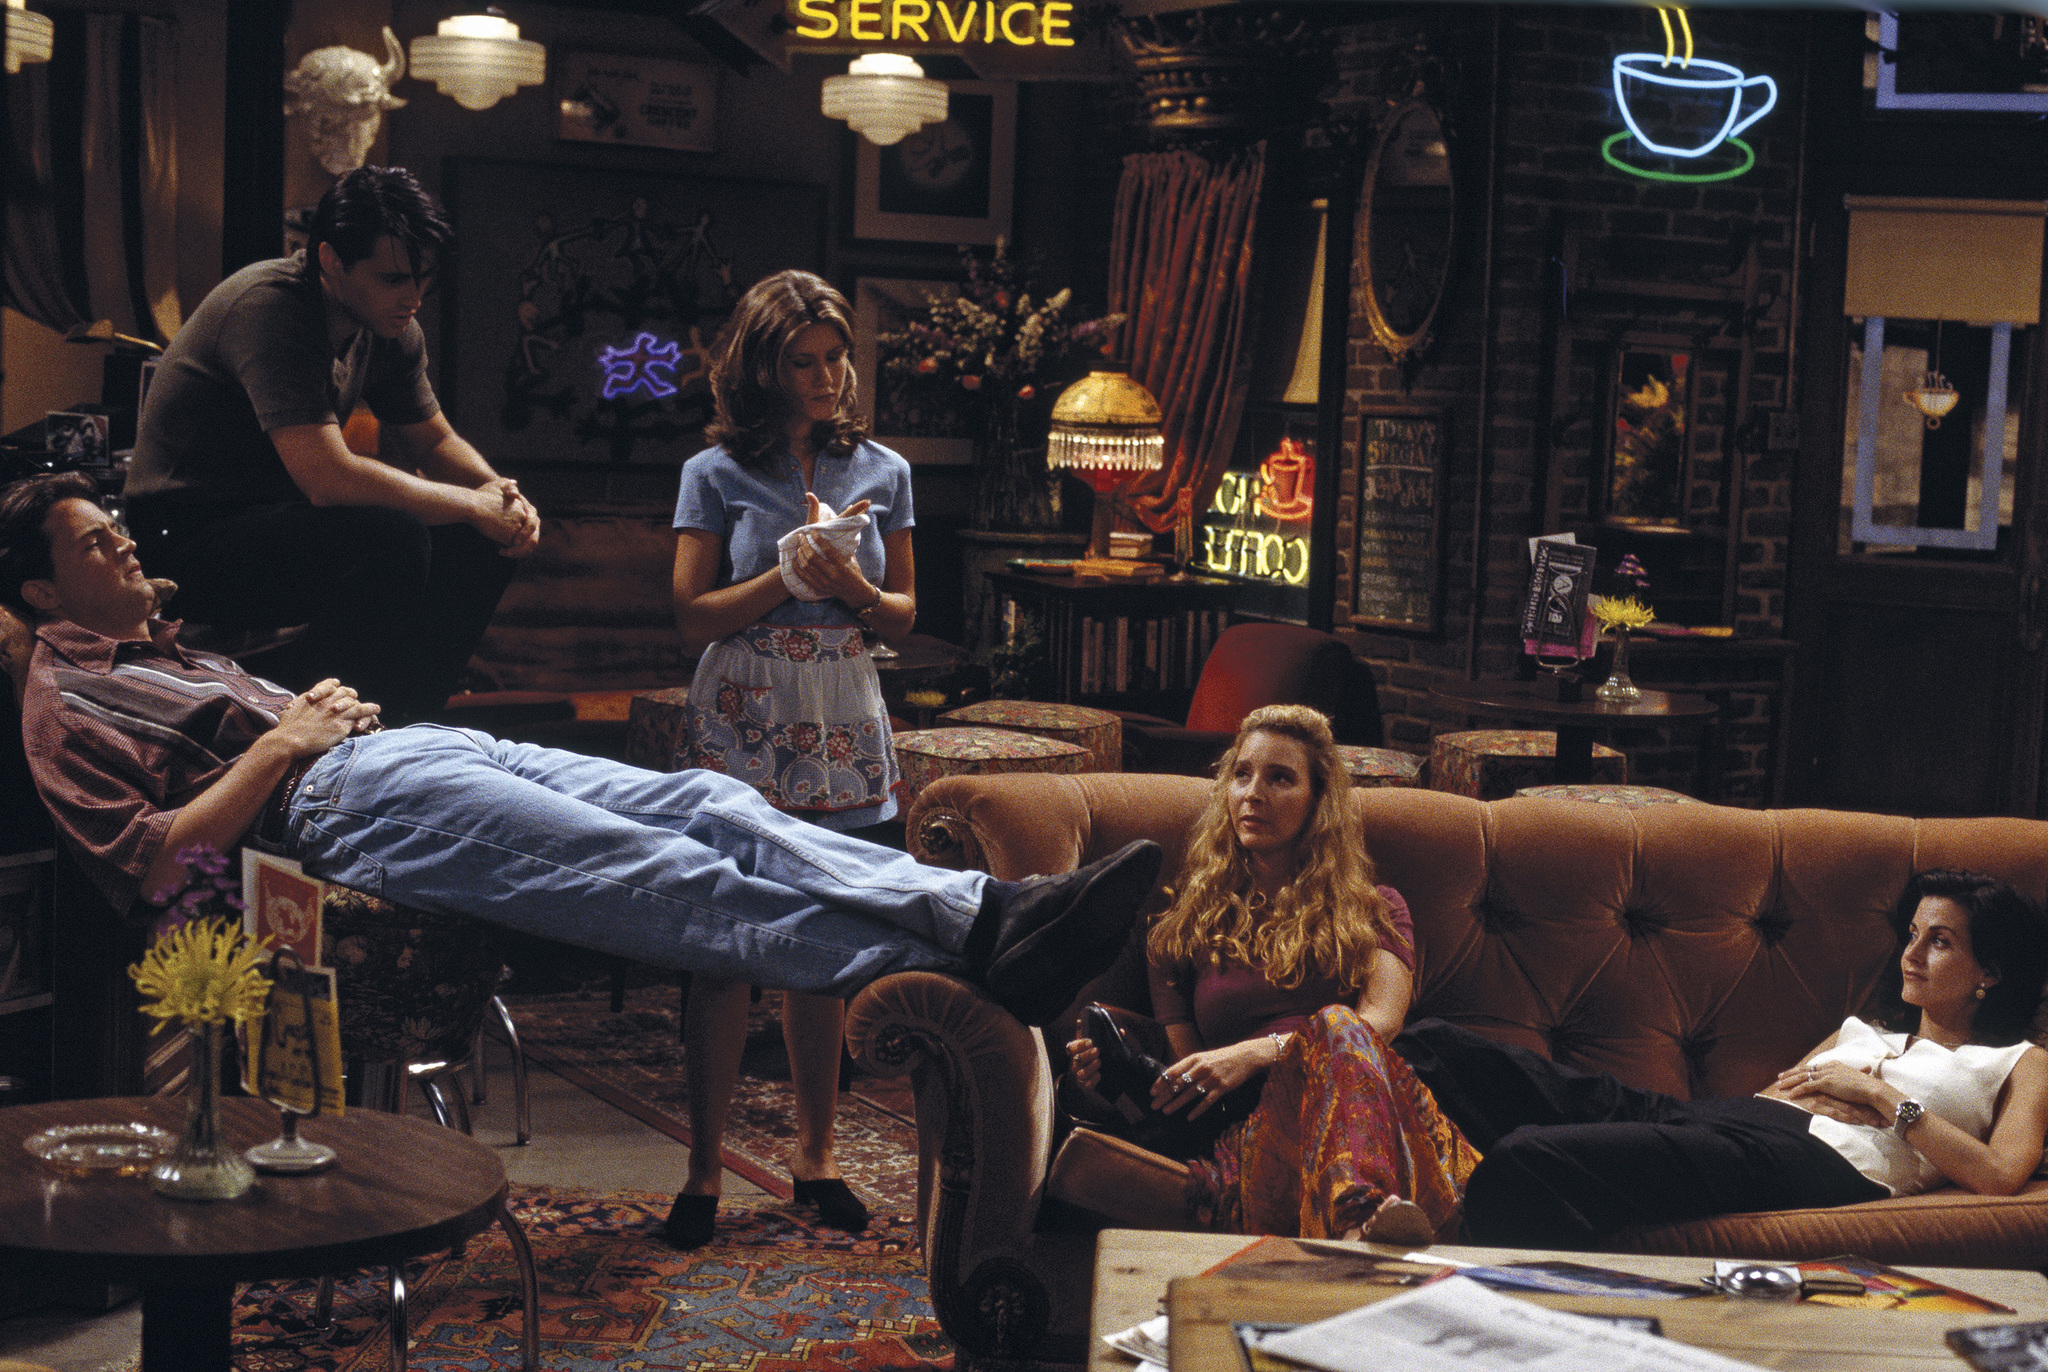 Chandler sits across a chair and couch while Phoebe sits on the couch next to monica lounging across the couch and joey sitting on the bar and Rachel standing in the background